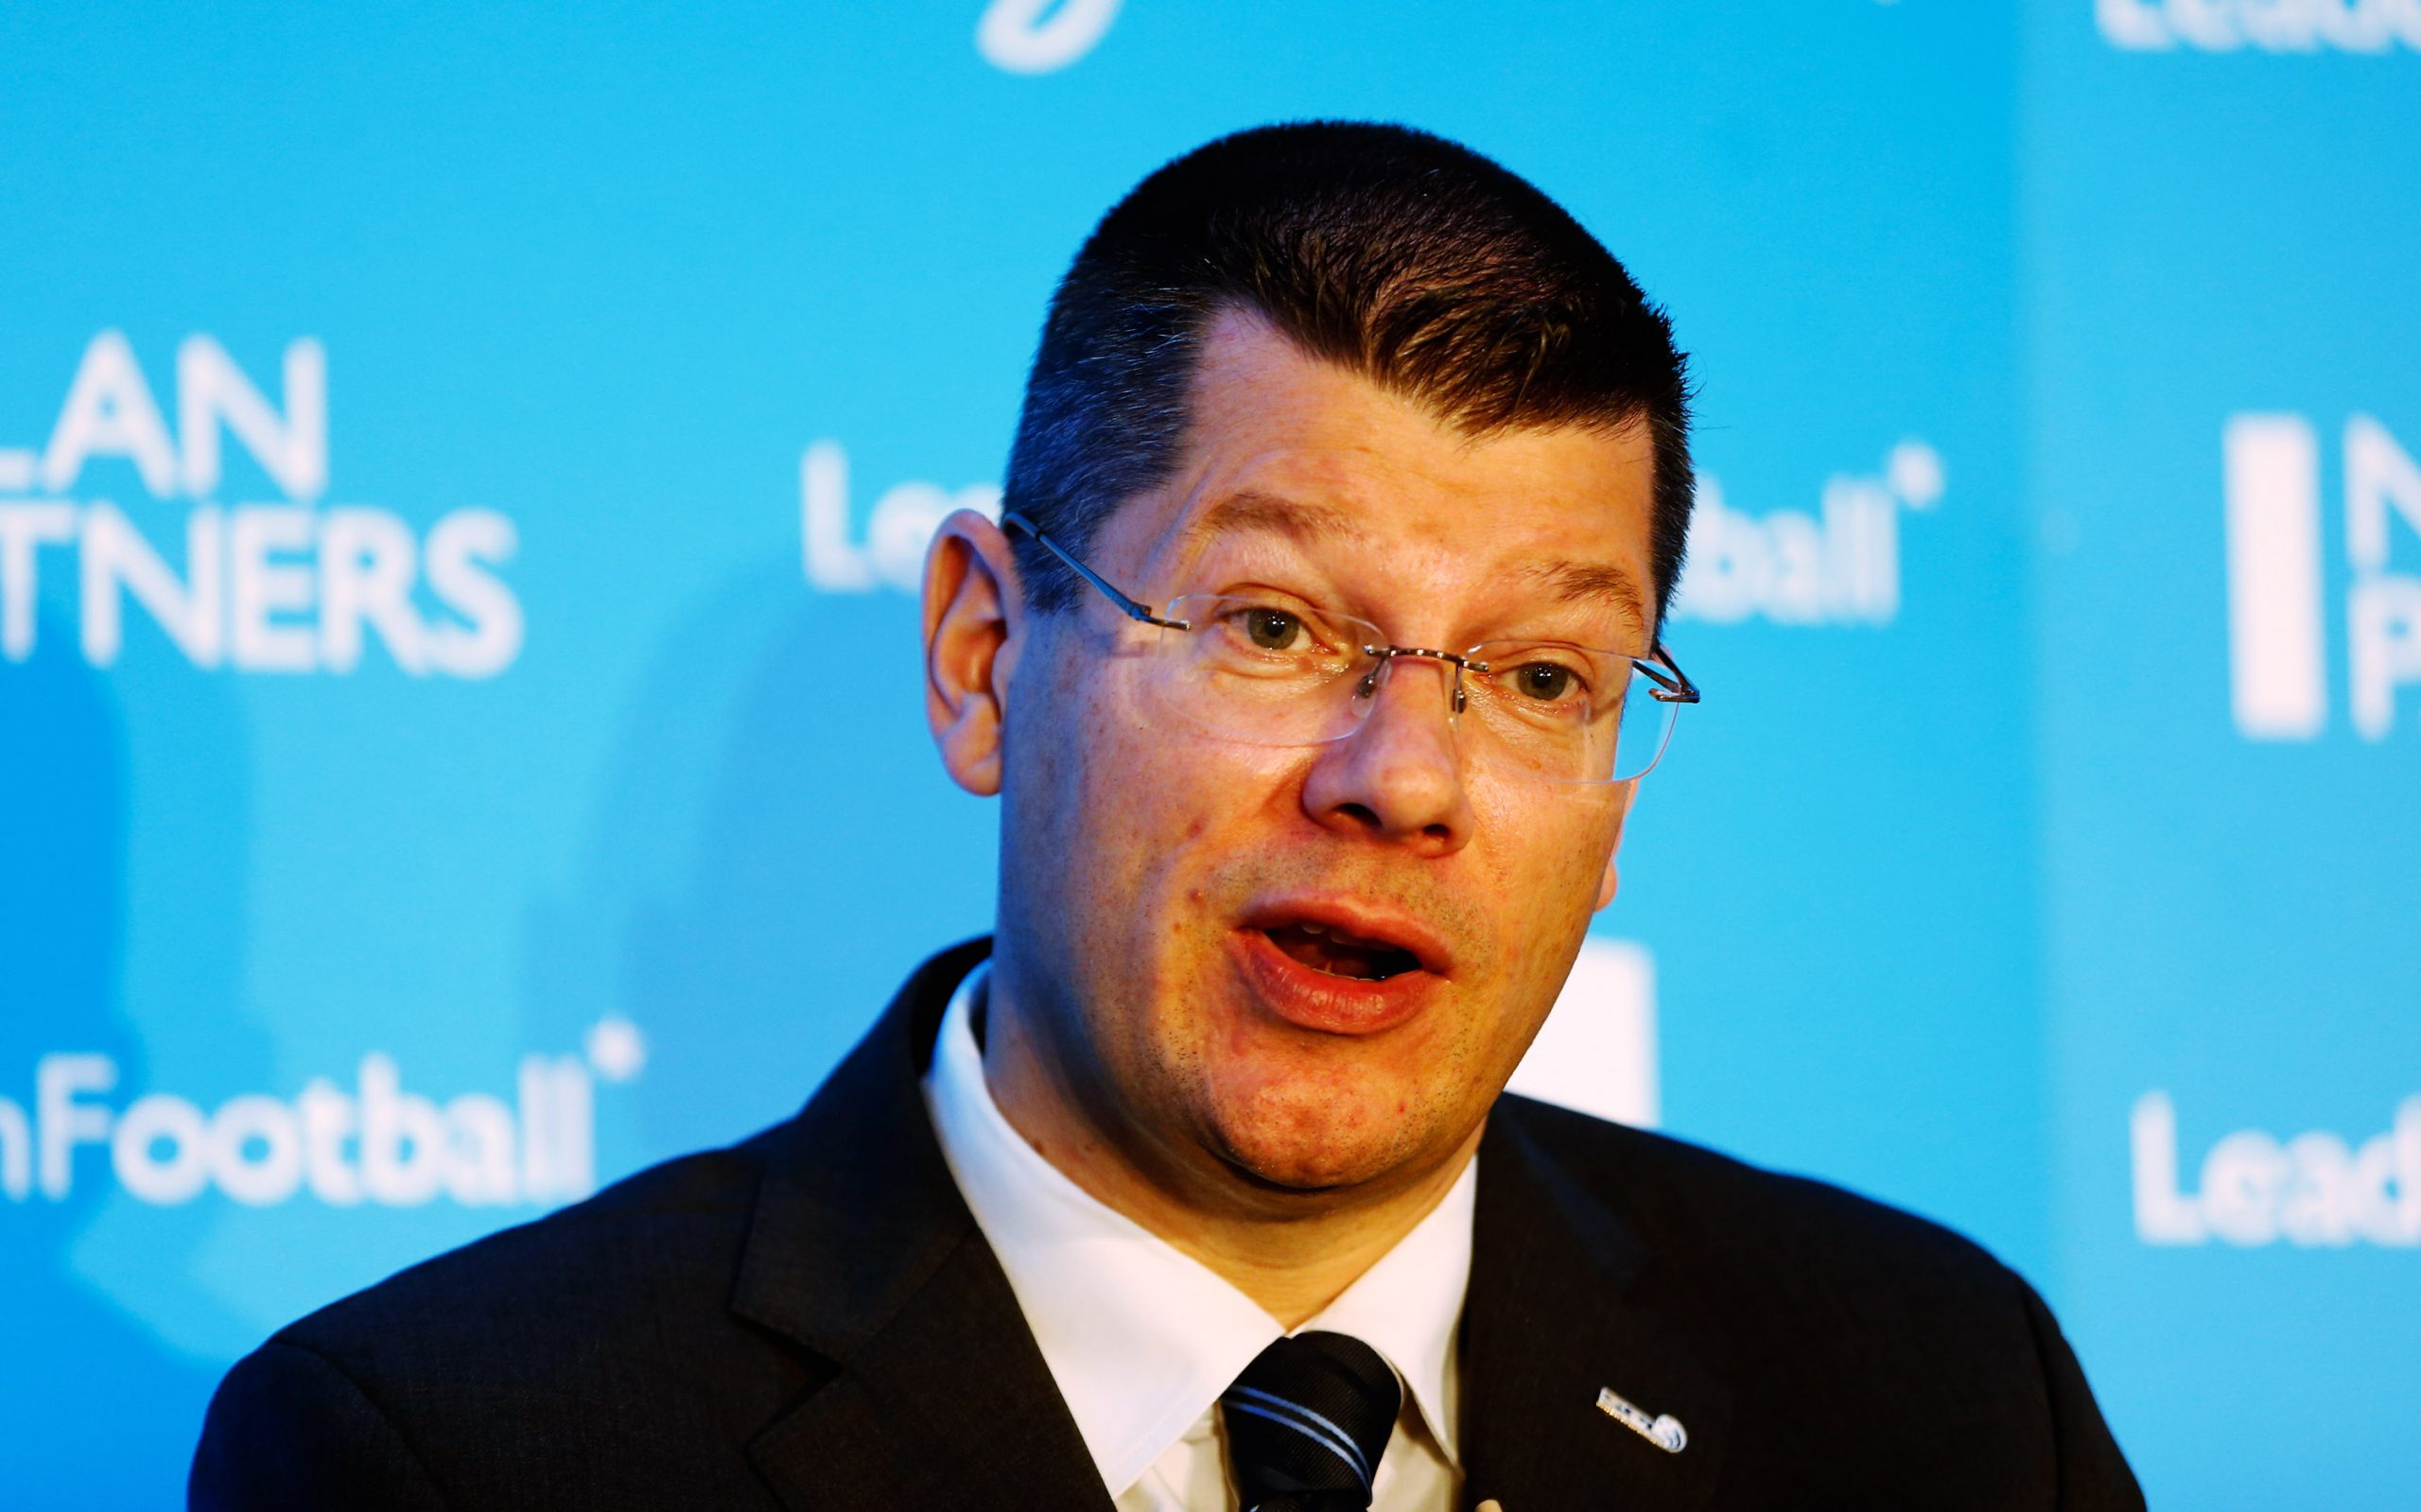 LONDON, ENGLAND - OCTOBER 11: Neil Doncaster, the CEO of the Scottish Premier League, talks during the Leaders In Sport conference at Stamford Bridge on October 11, 2012 in London, England.